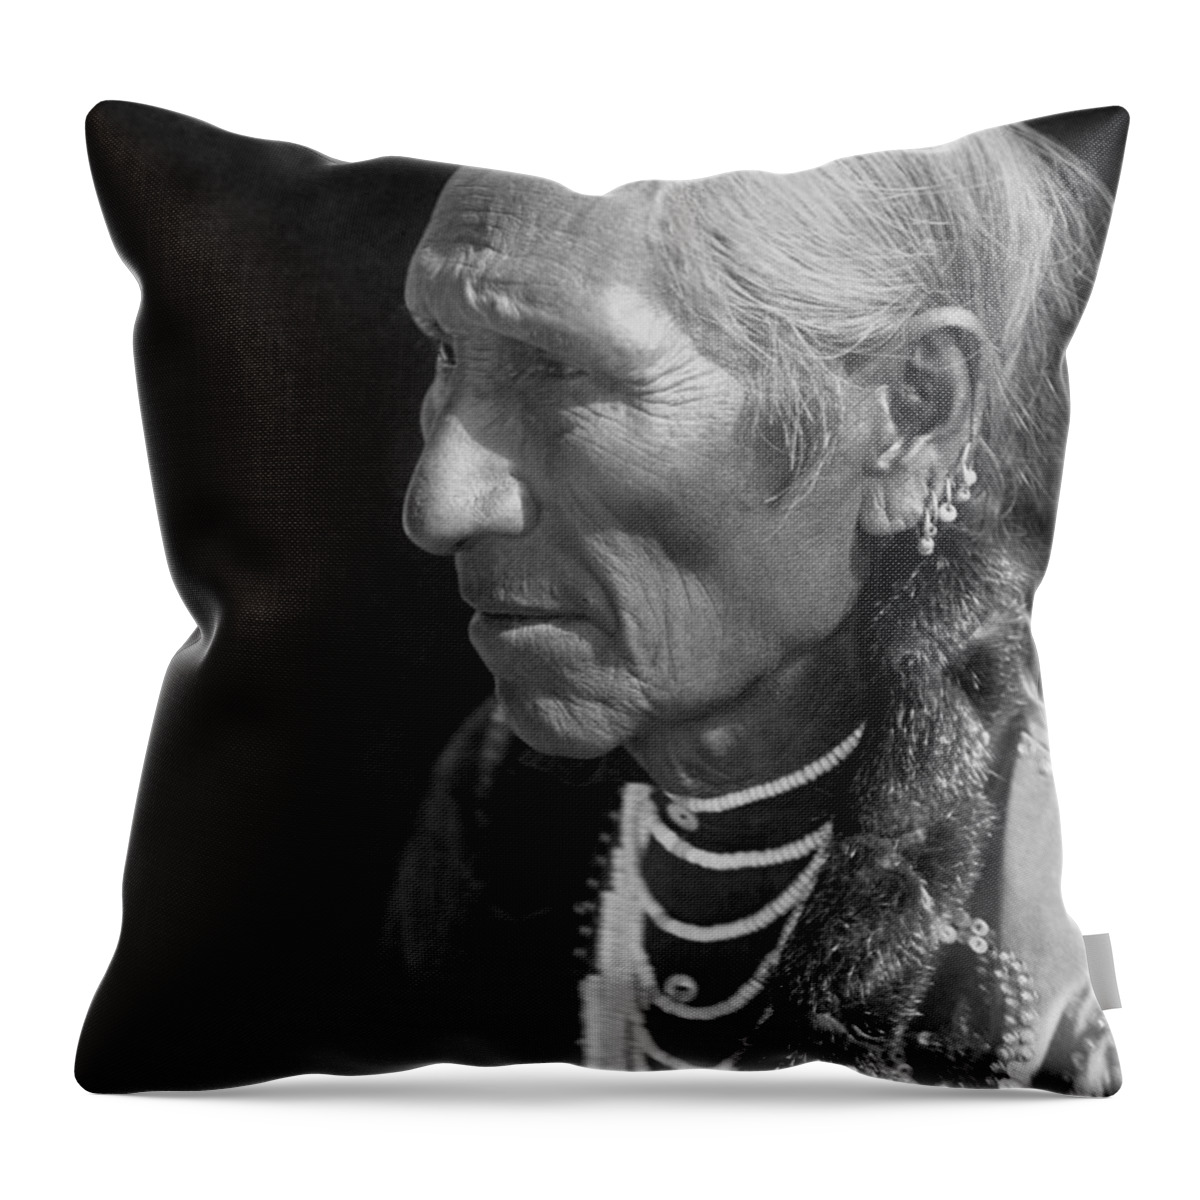 1910 Throw Pillow featuring the photograph Salish Indian circa 1910 by Aged Pixel